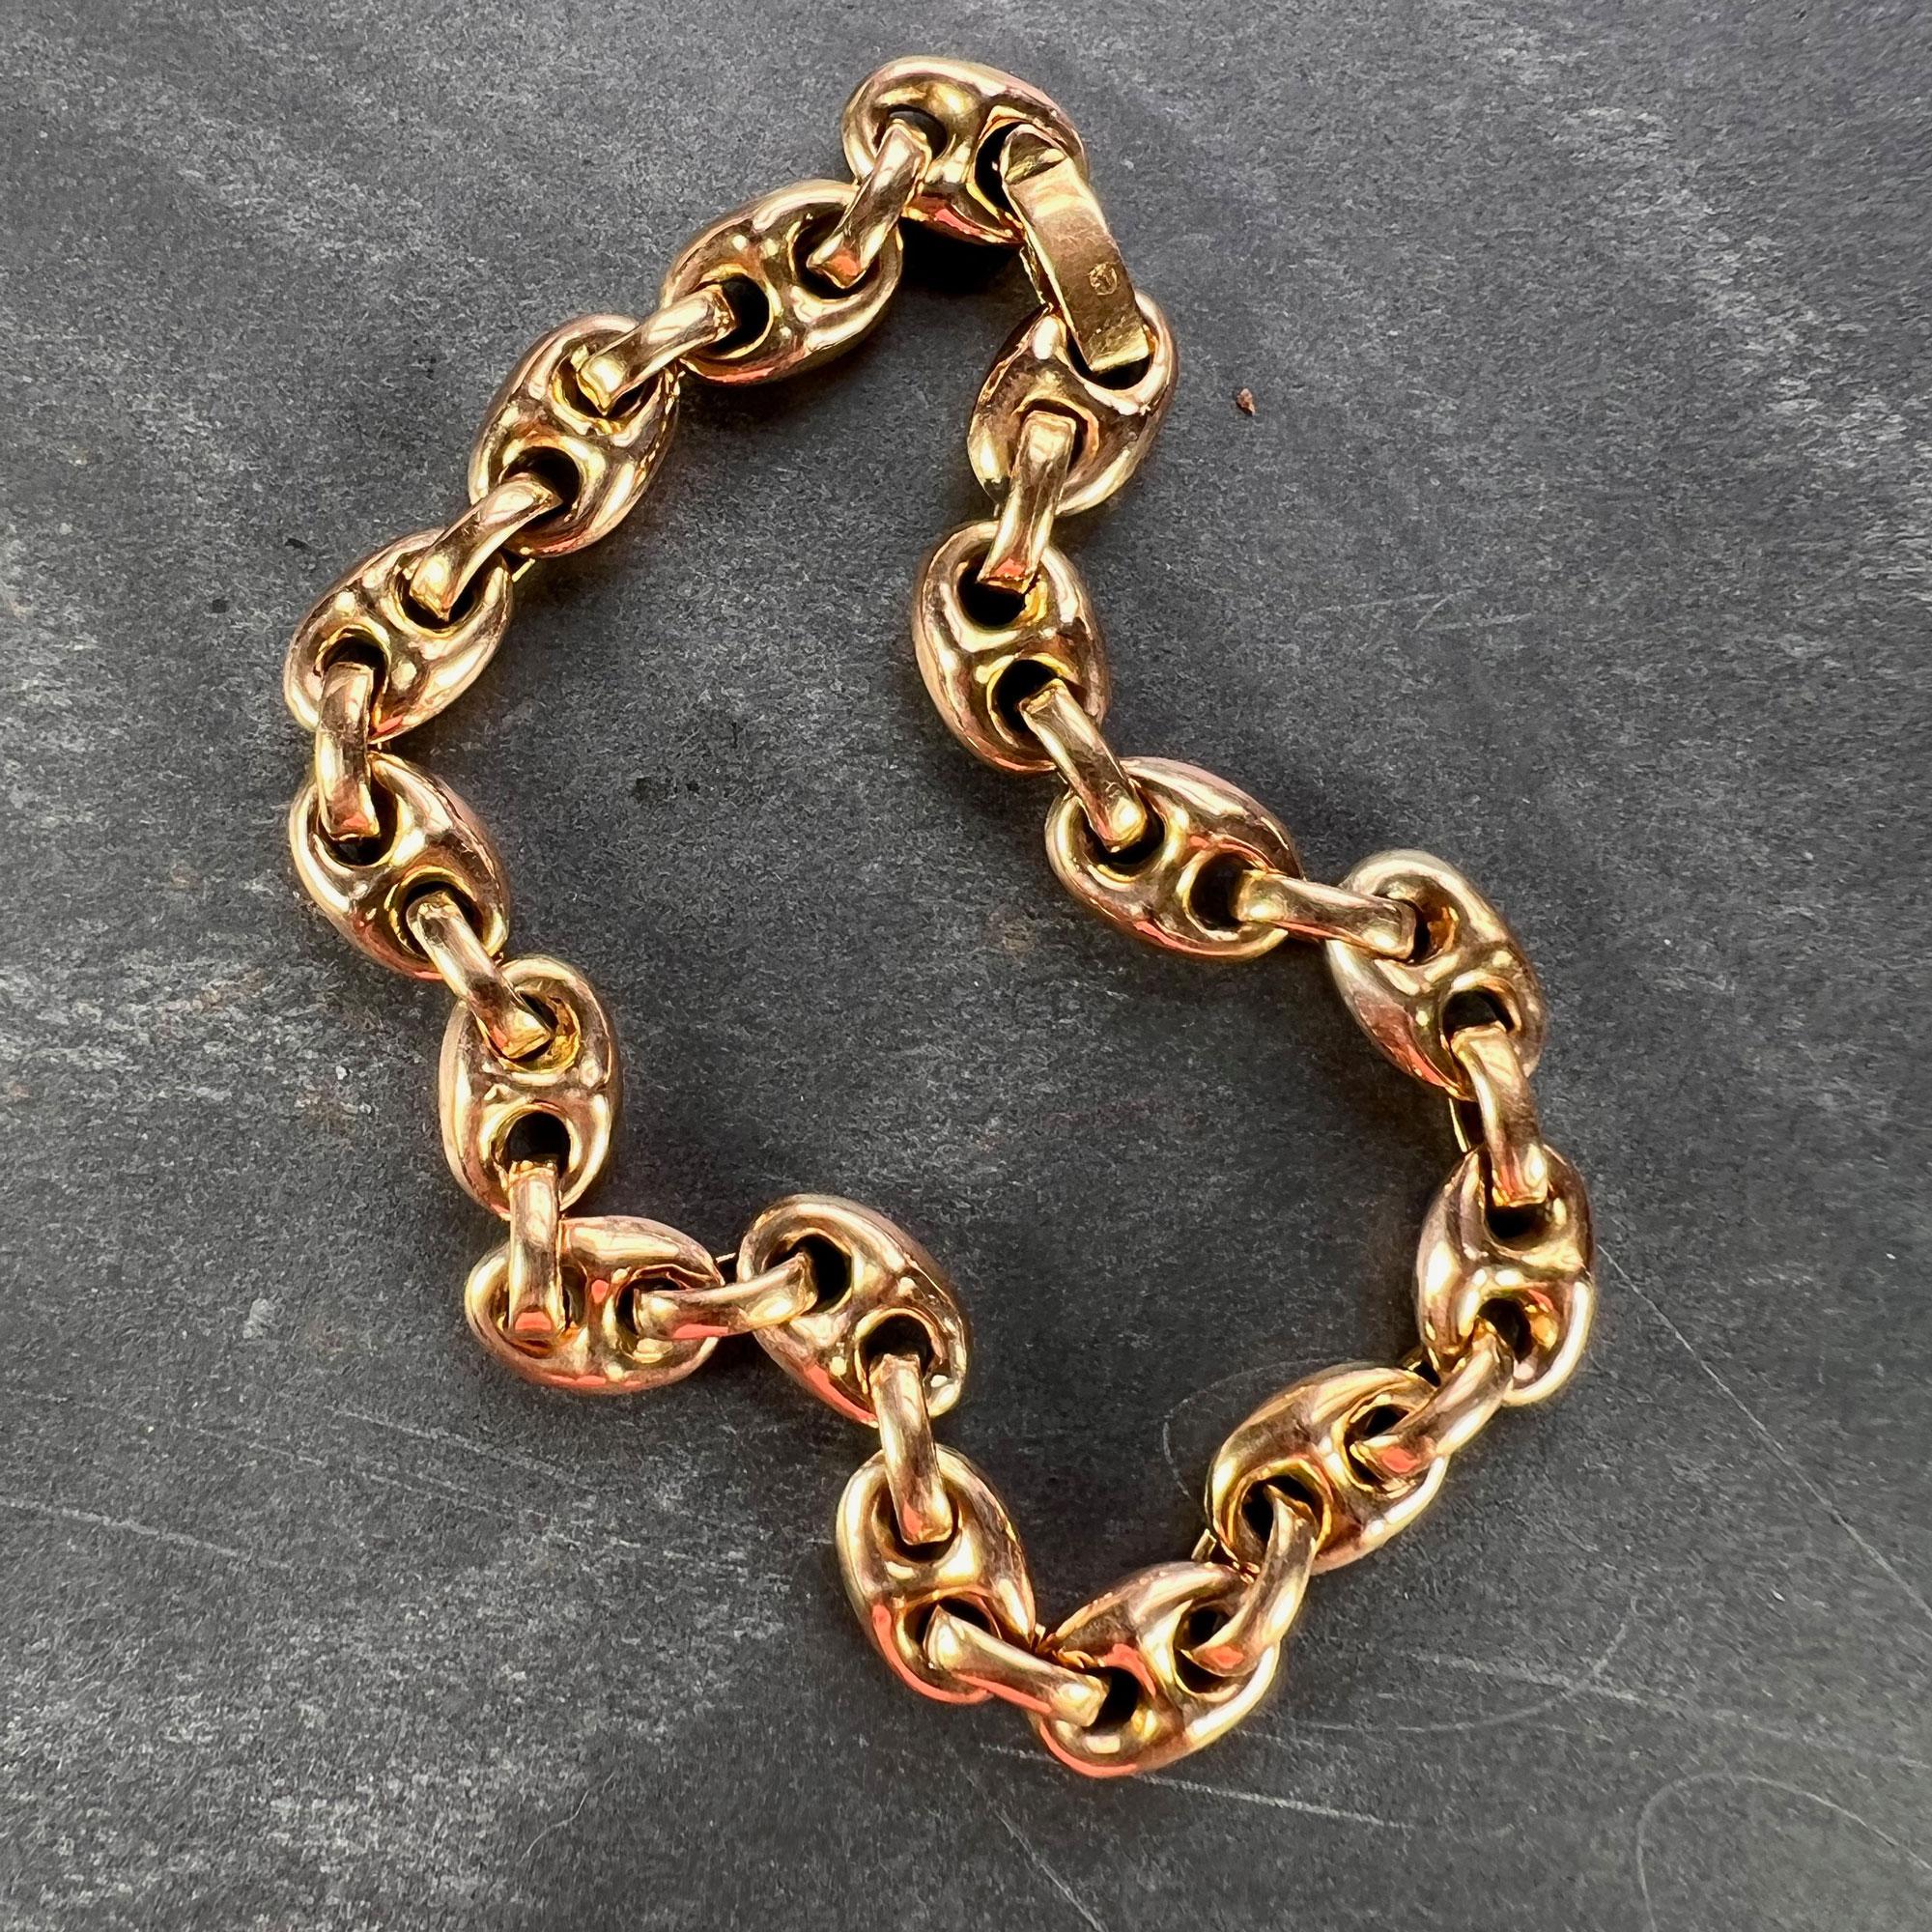 An 18 karat (18K) rose gold mariner link bracelet. Stamped with the owl for 18 karat gold and French import. 8 inches long. 

Dimensions: 19 x 0.8 x 0.5 cm
Weight: 10.59 grams 